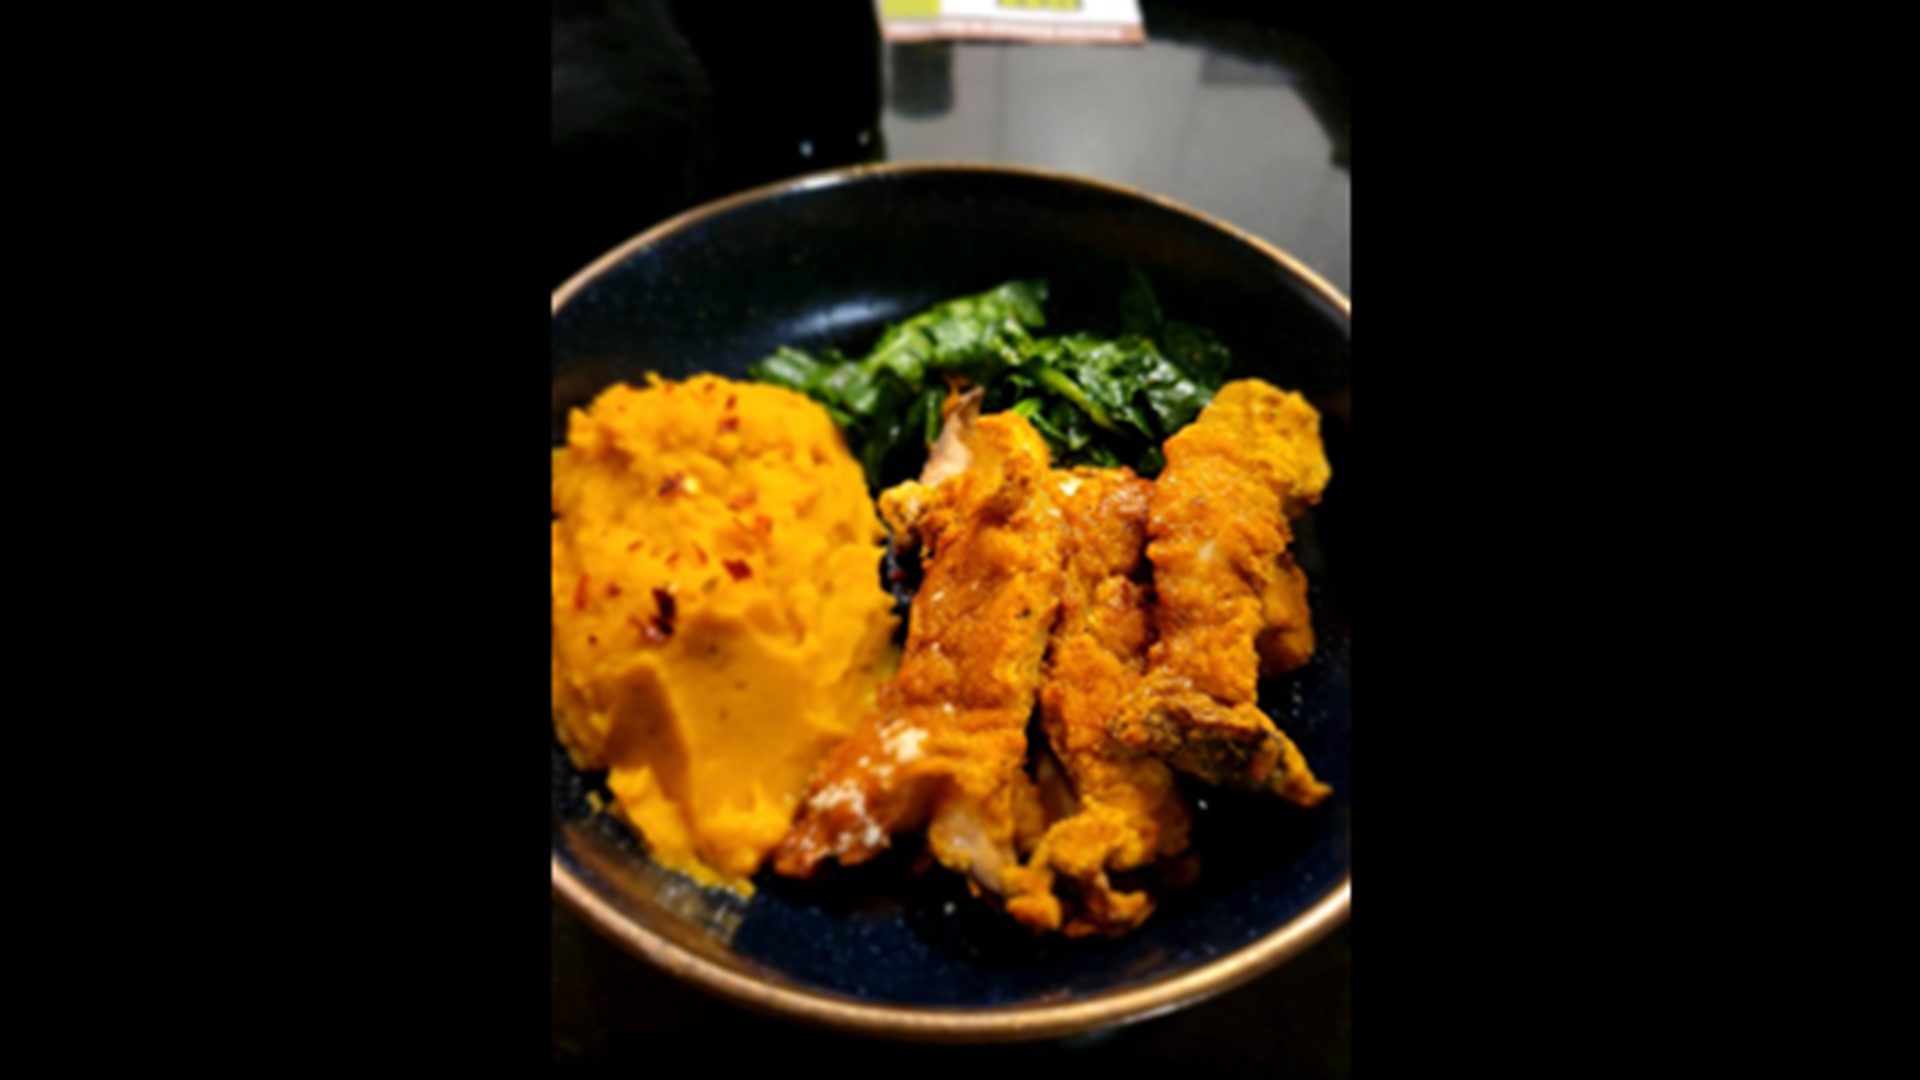 Fried oyster mushrooms, sweet potato puree and cooked greens.